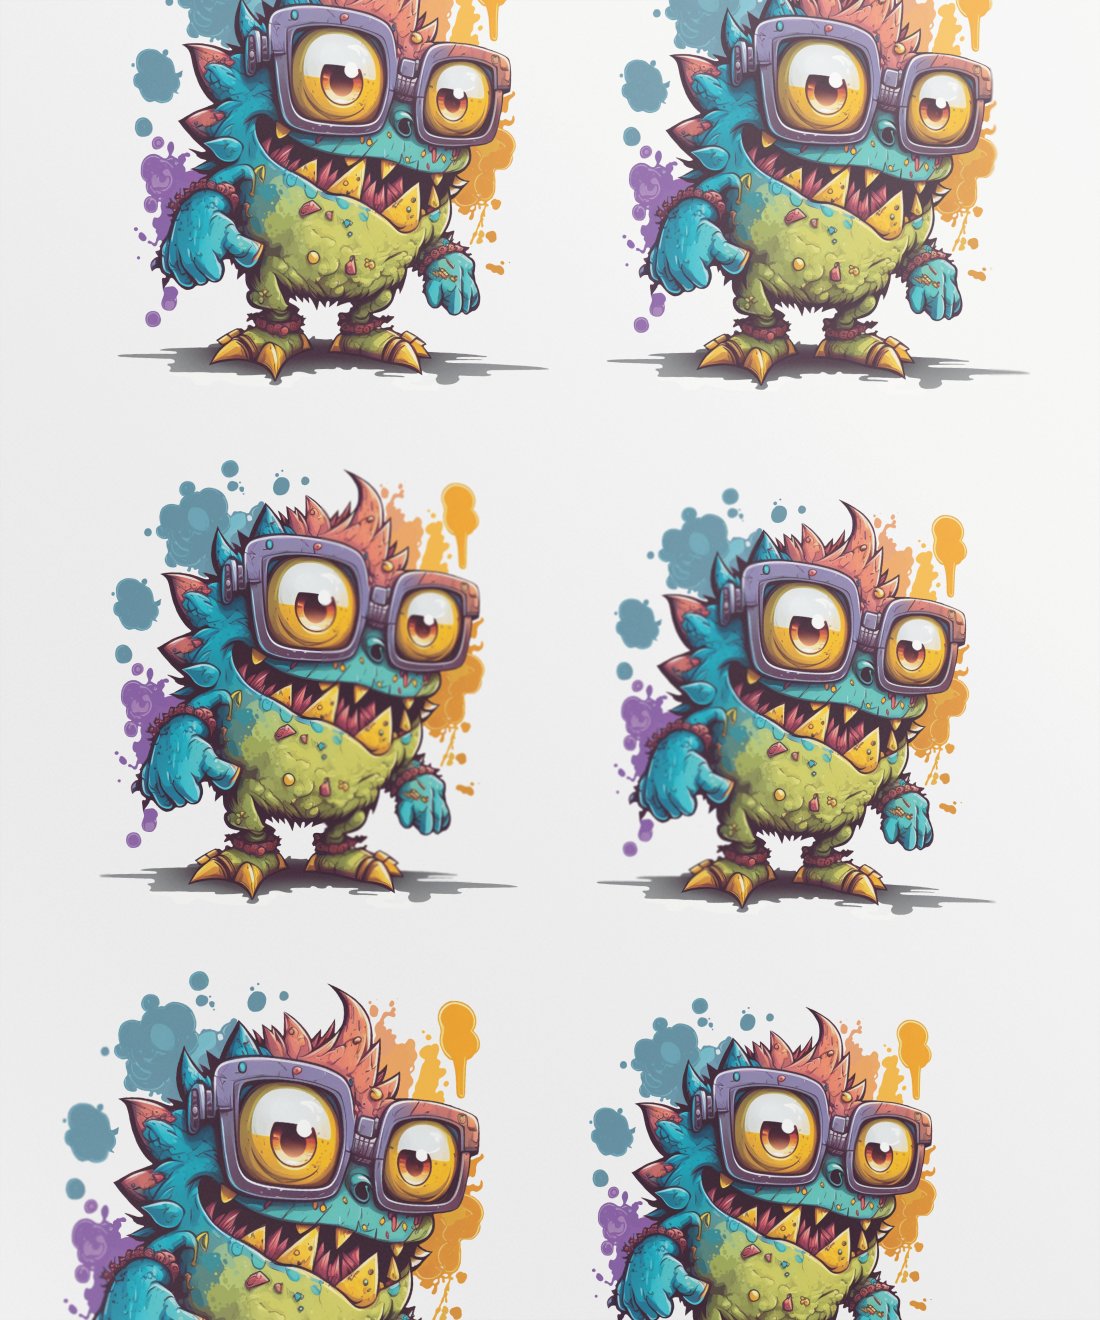 colorful-cartoon-monster-image1